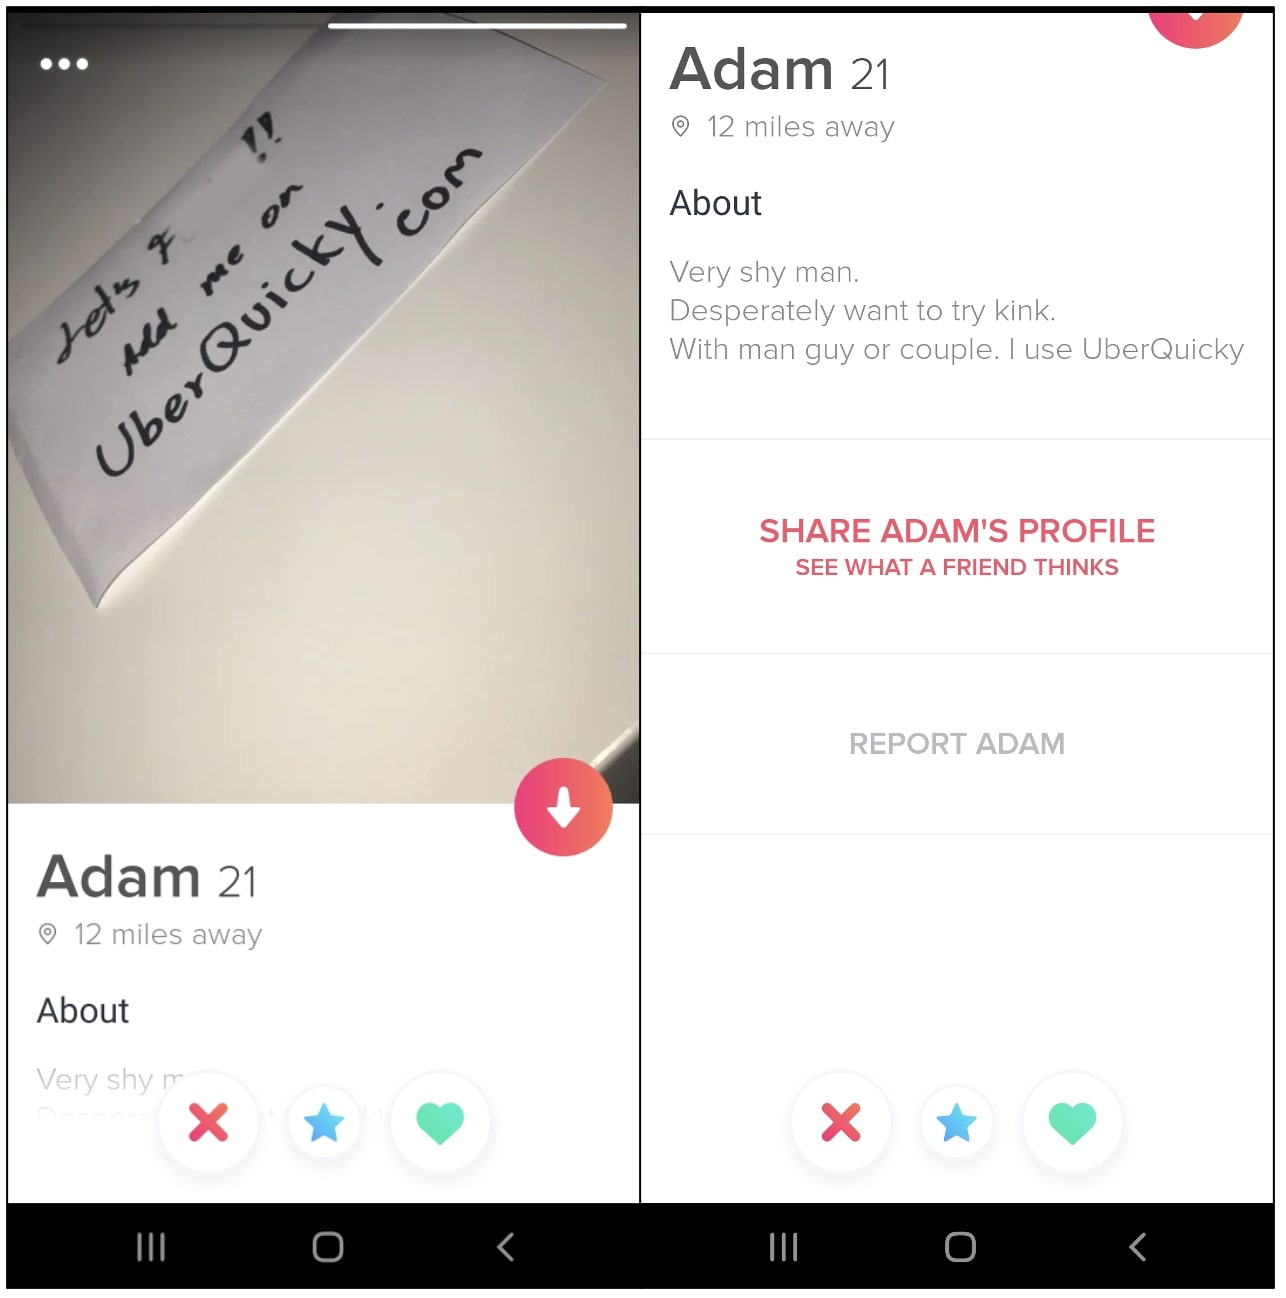 How to Make a Tasteful (Yet Successful) Tinder Profile